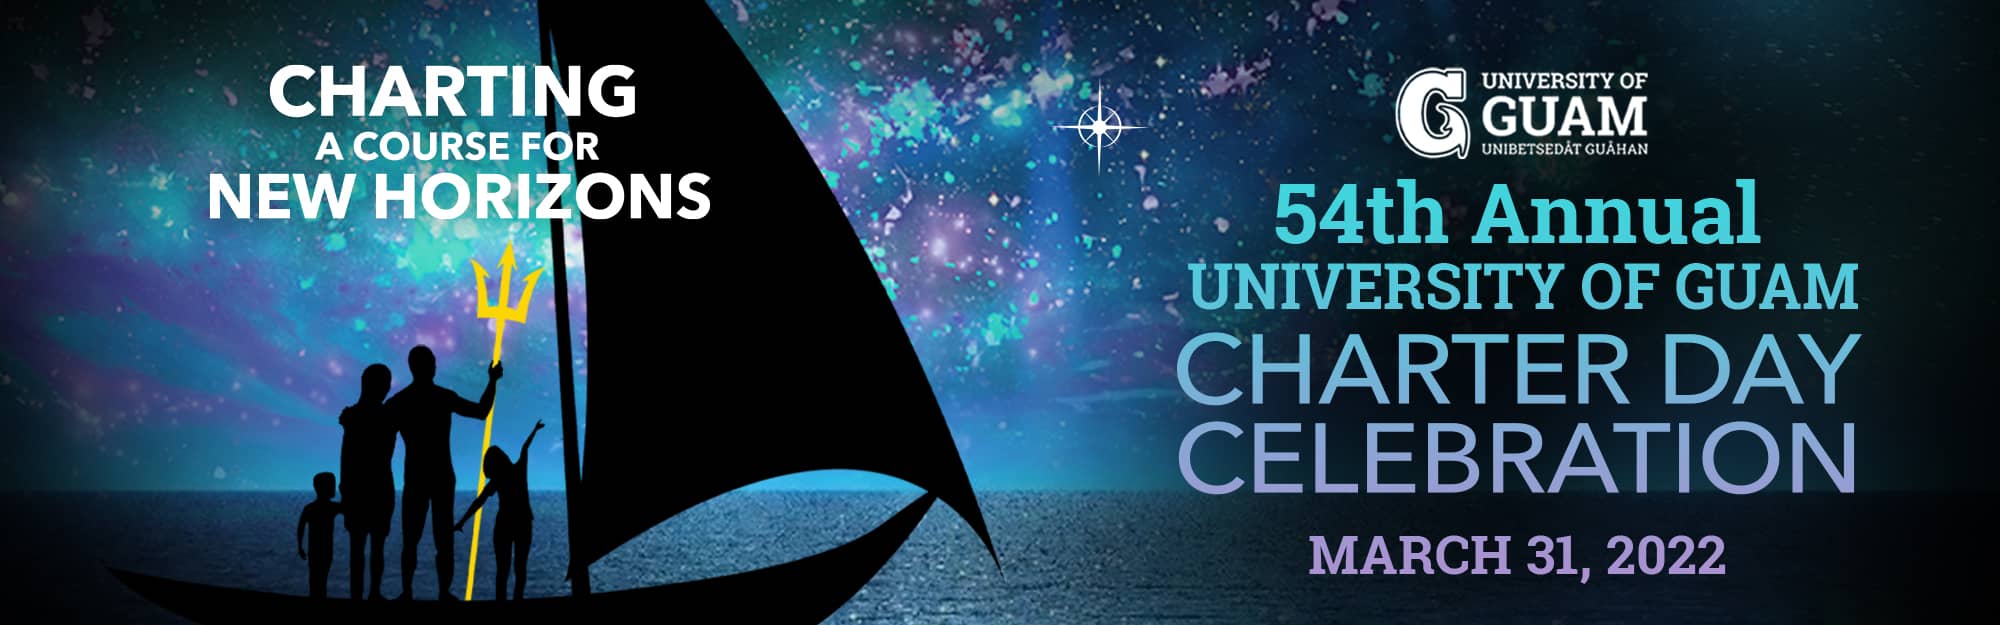 54th Annual University of Guam Charter Day Celebration on March 31, 2022. This year's theme is Charting a Course for New Horizons.